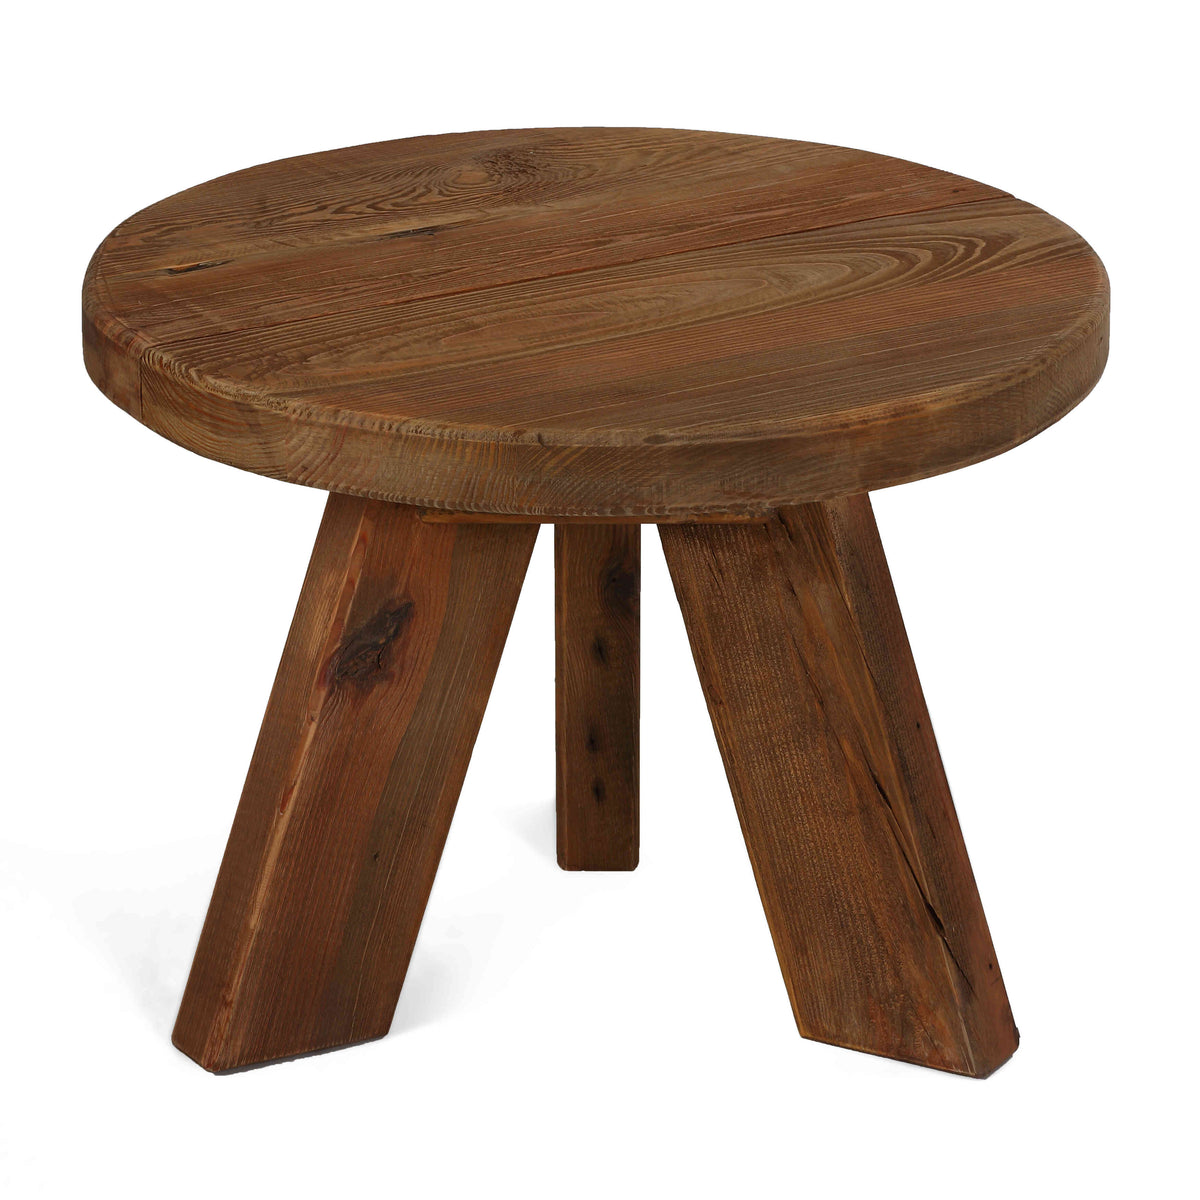 Bare Decor Weston Small Round End Table in Reclaimed Wood